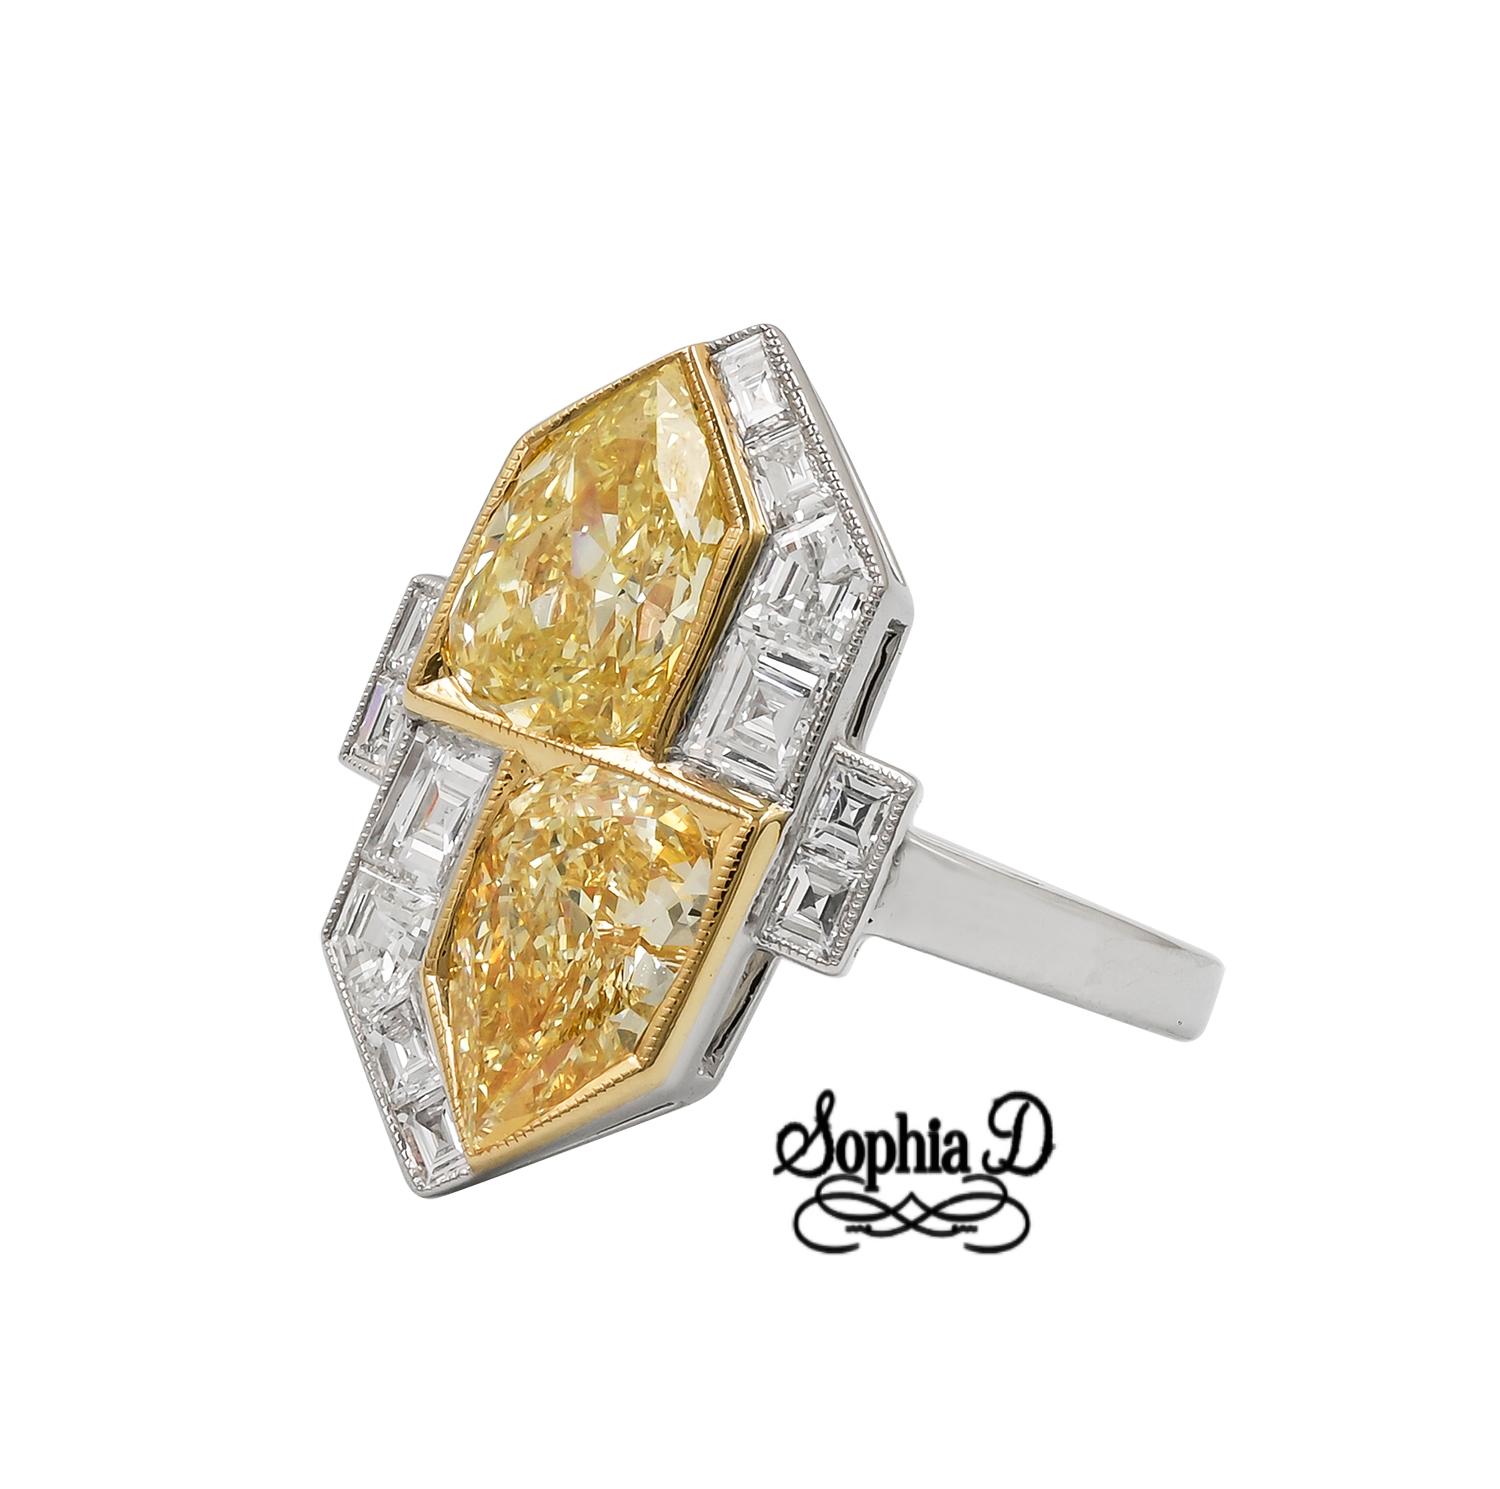 This art deco inspired ring set in platinum features a 1.33 carat and 1.54 carat pear shaped yellow diamonds and 0.87 carat surrounding diamonds.

Sophia D by Joseph Dardashti LTD has been known worldwide for 35 years and are inspired by classic Art